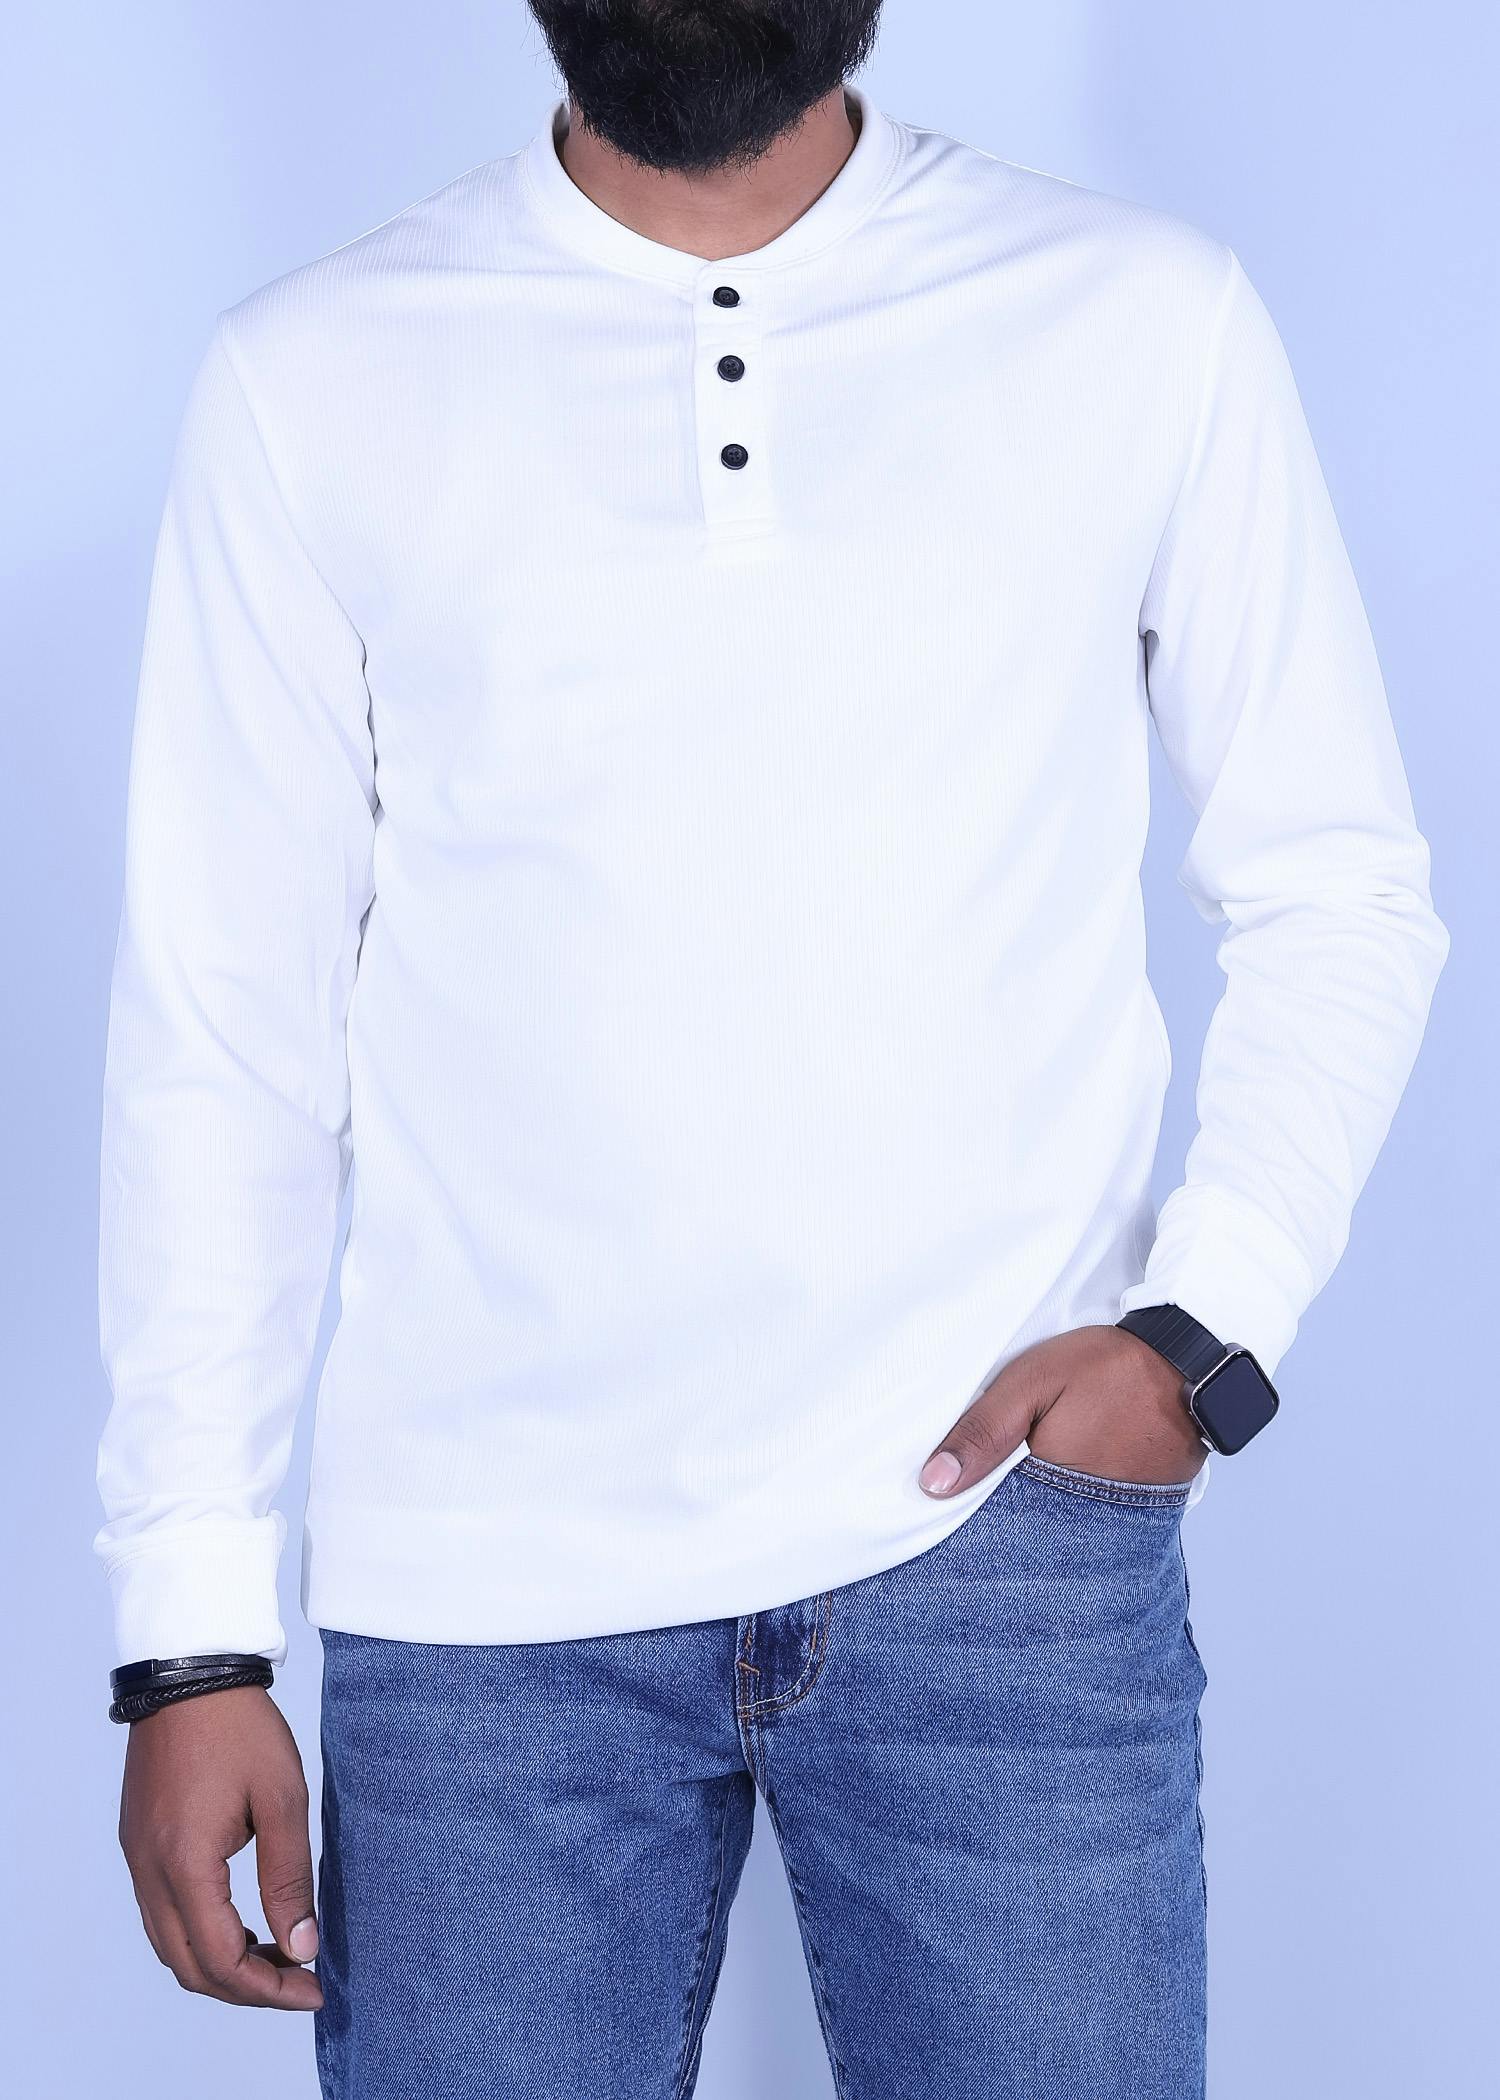 iwi henley ls t shirt white color half front view